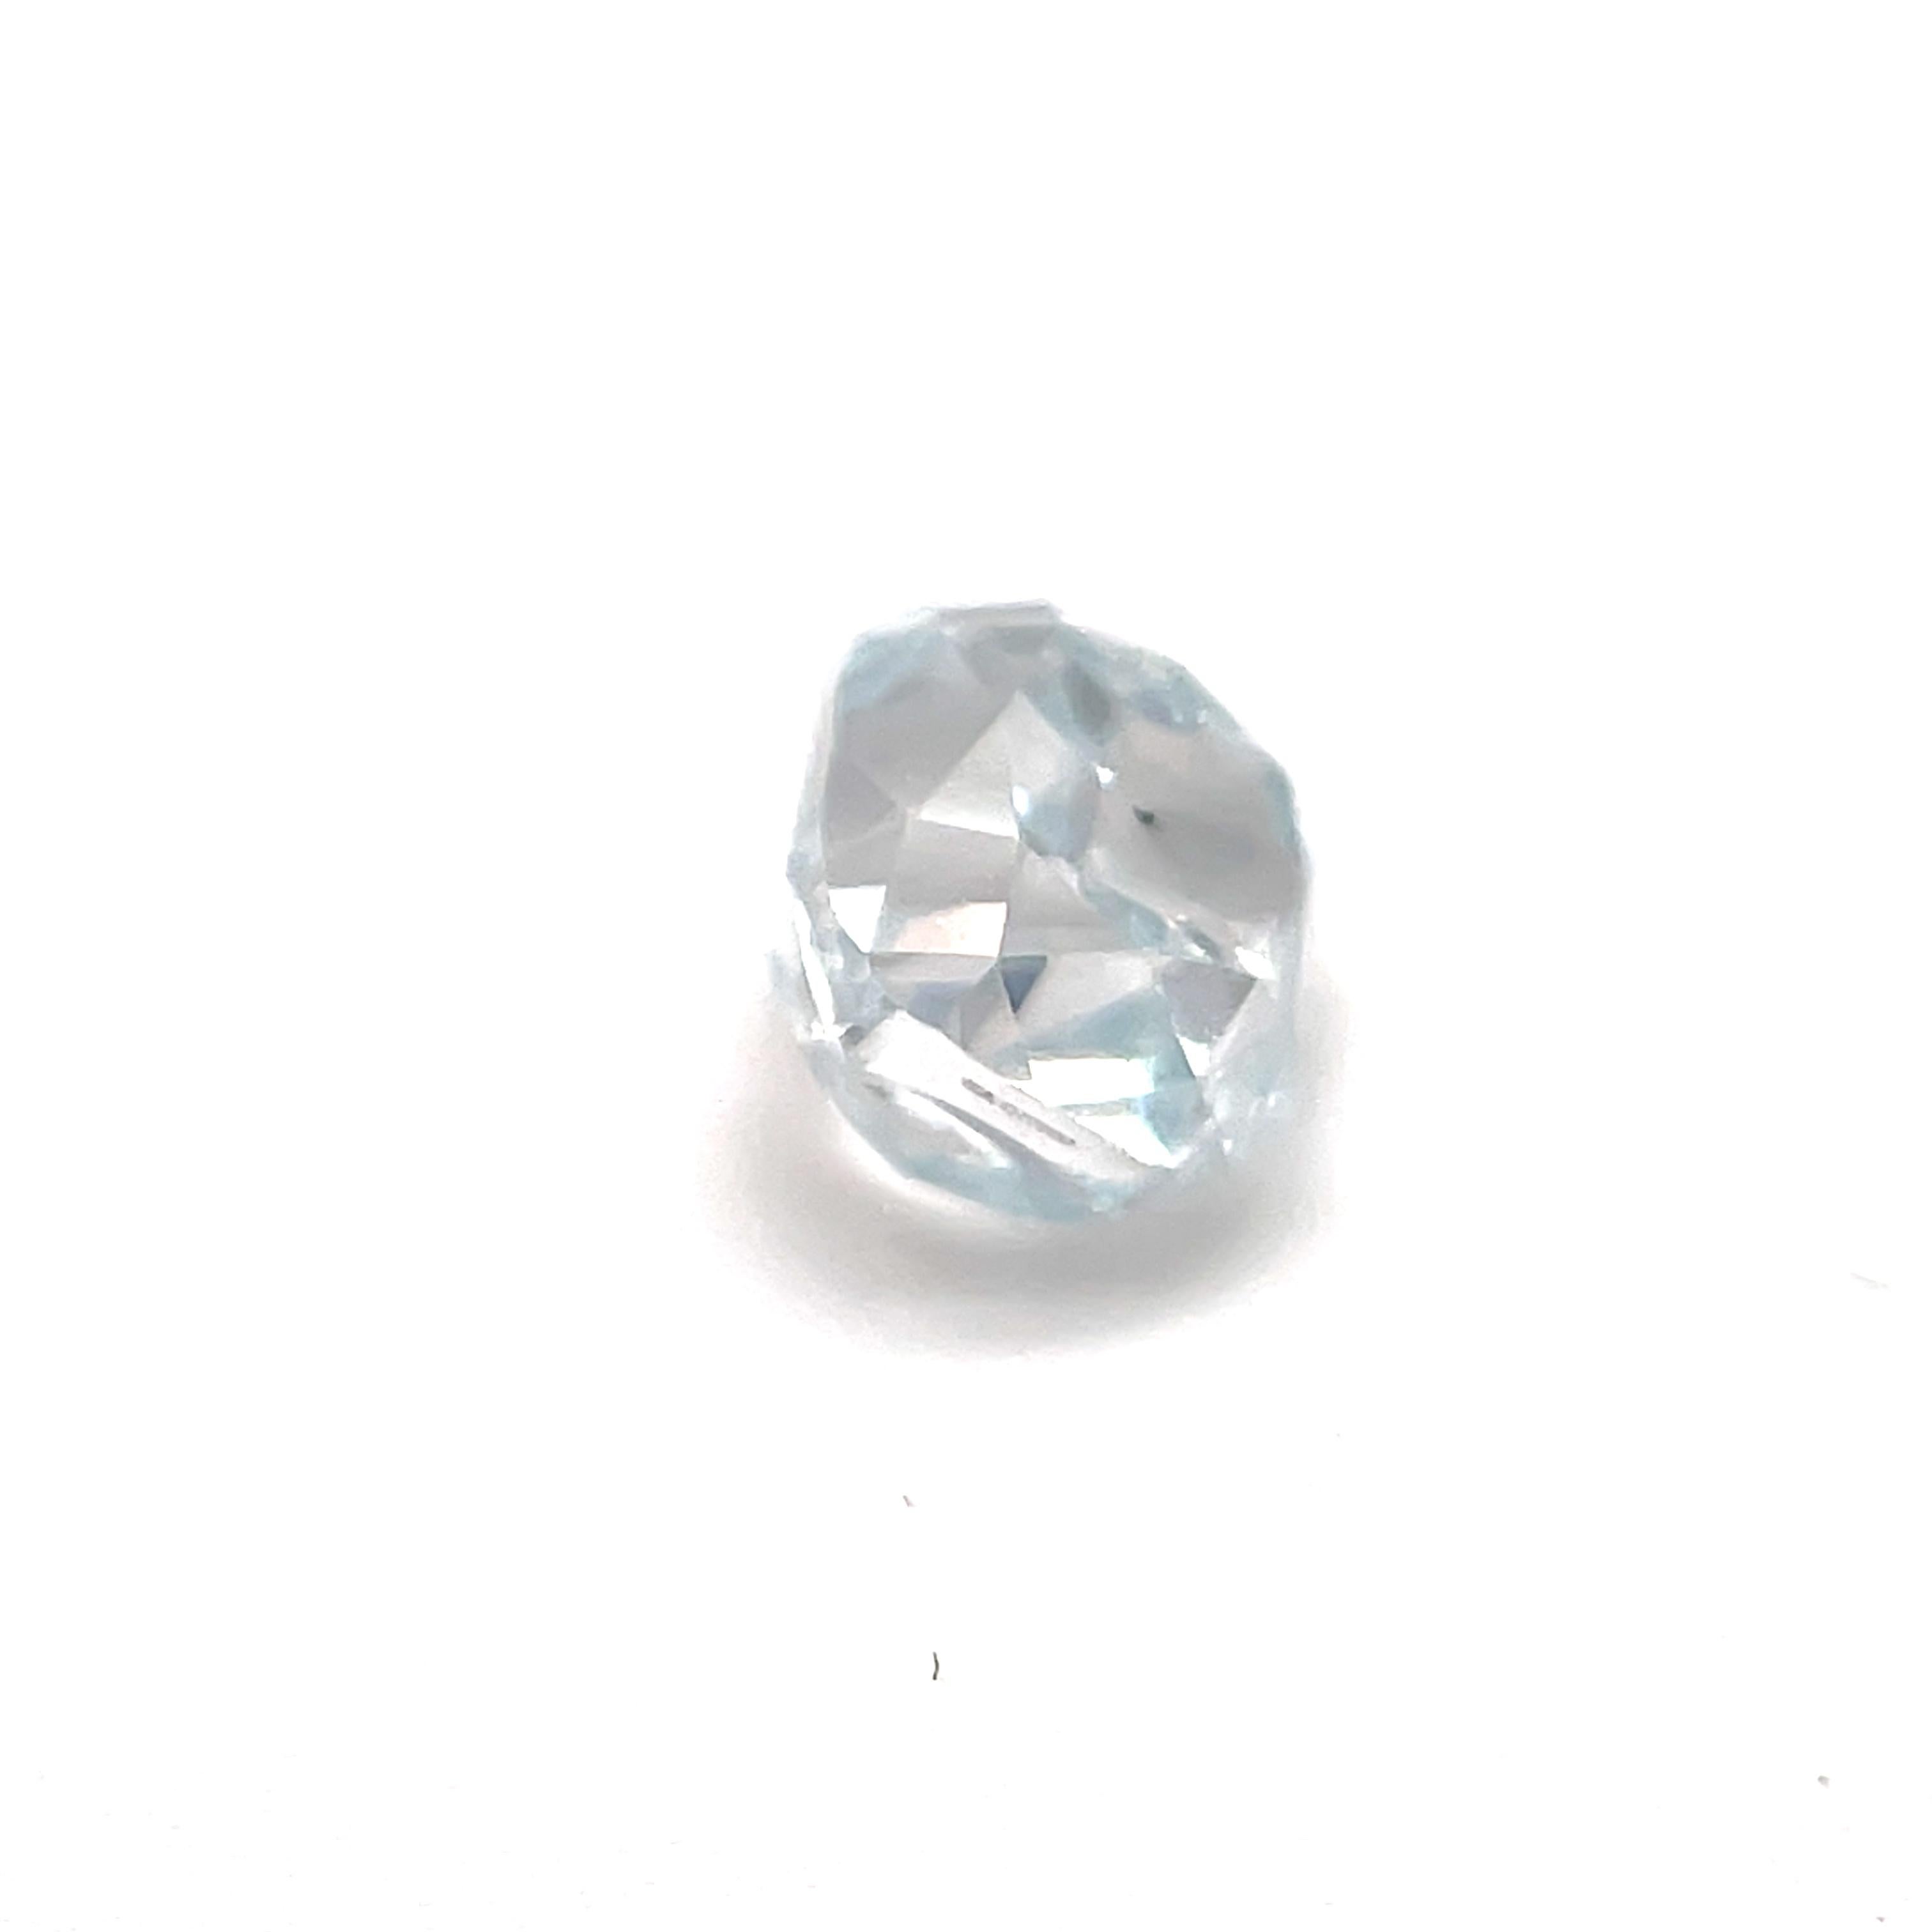 Exquisite GIA certified 1.01 Carat Fancy Greenish Blue , SI1 clarity Diamond, unset cushion modified brilliant cut loose diamond for bespoke jewel or investment. Propose with an engagement ring!

This is a great opportunity to offer a loose gemstone